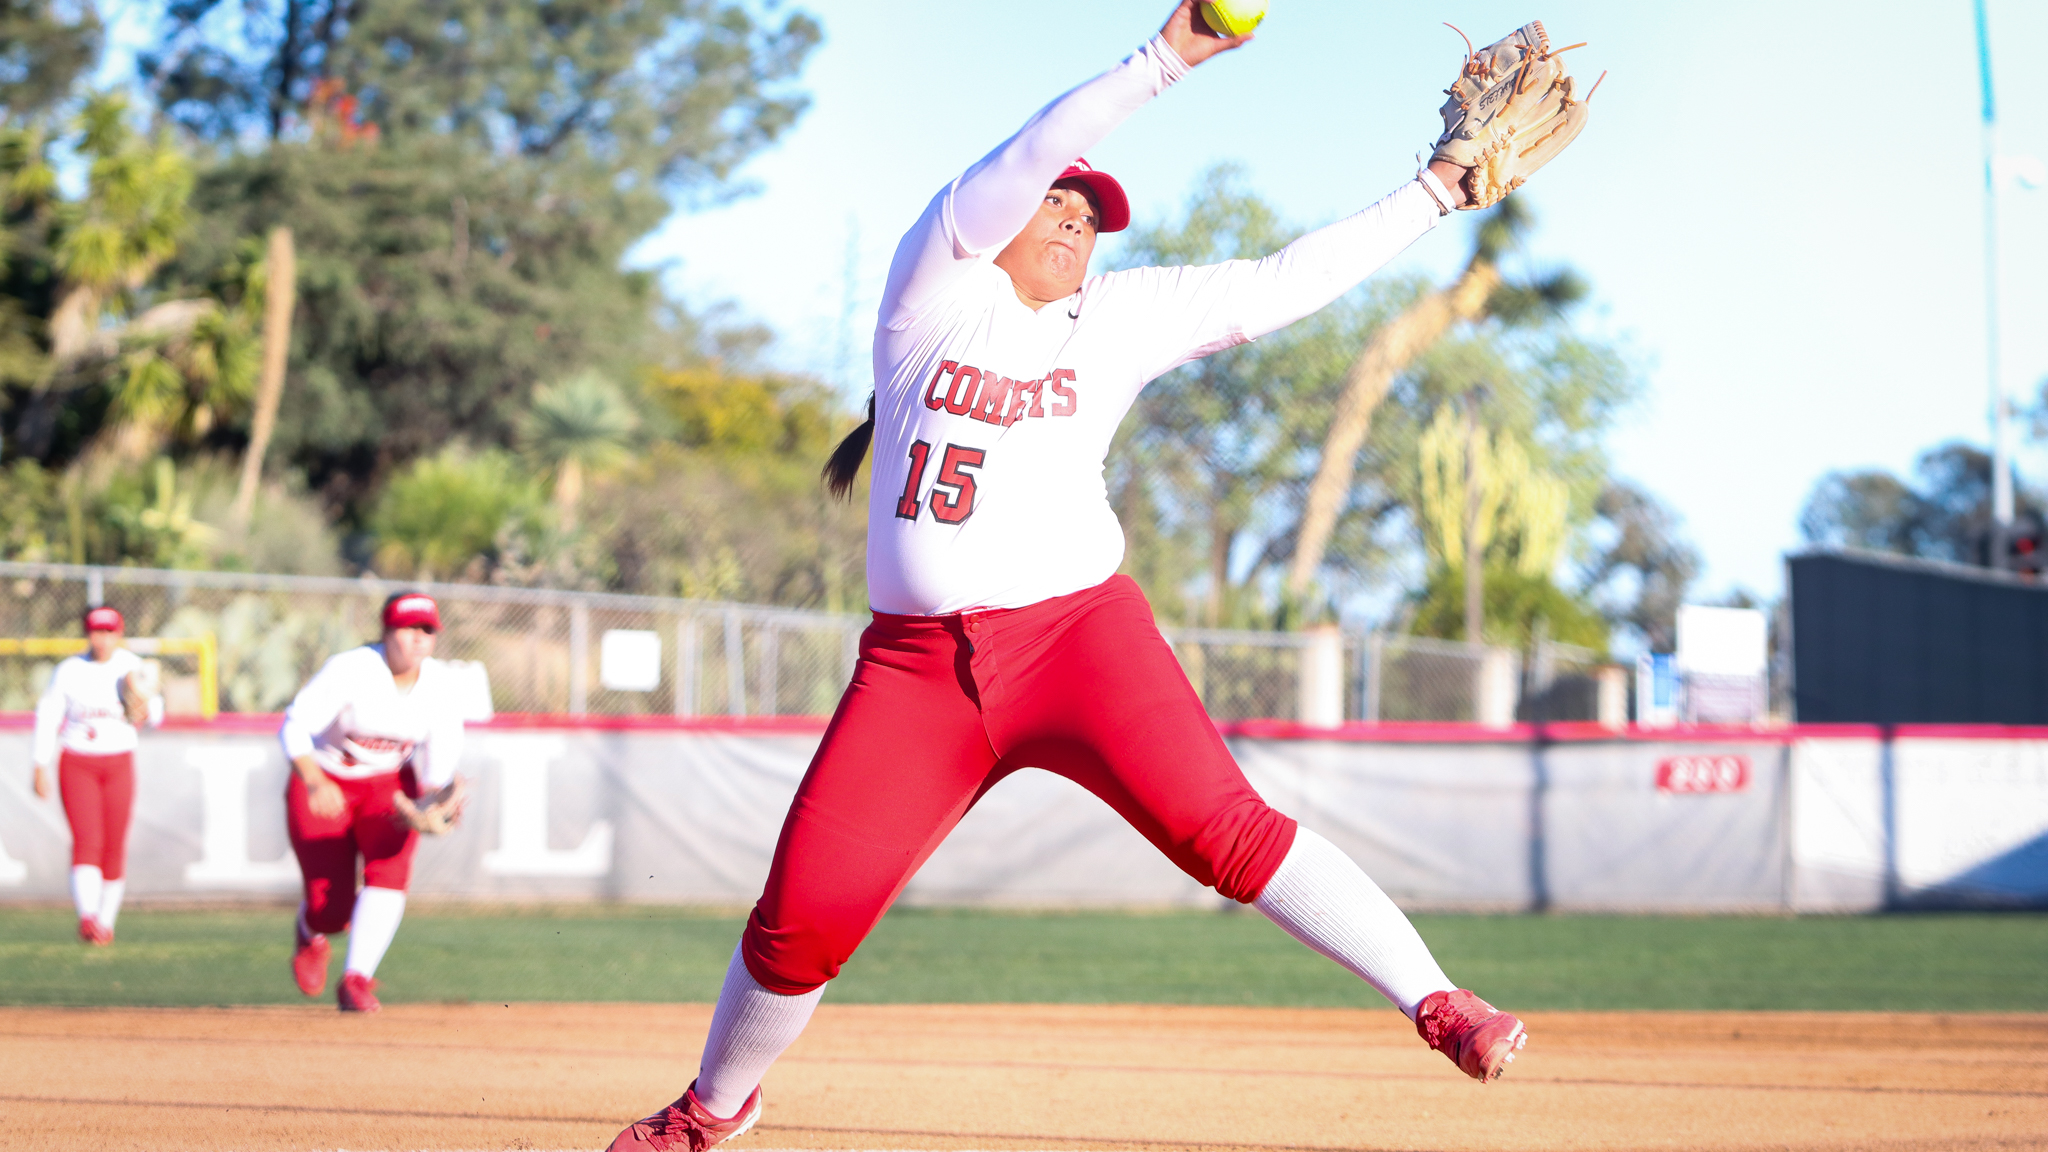 Farrah Steffany pitched her second no-hitter this season. Photo by Cara Heise.